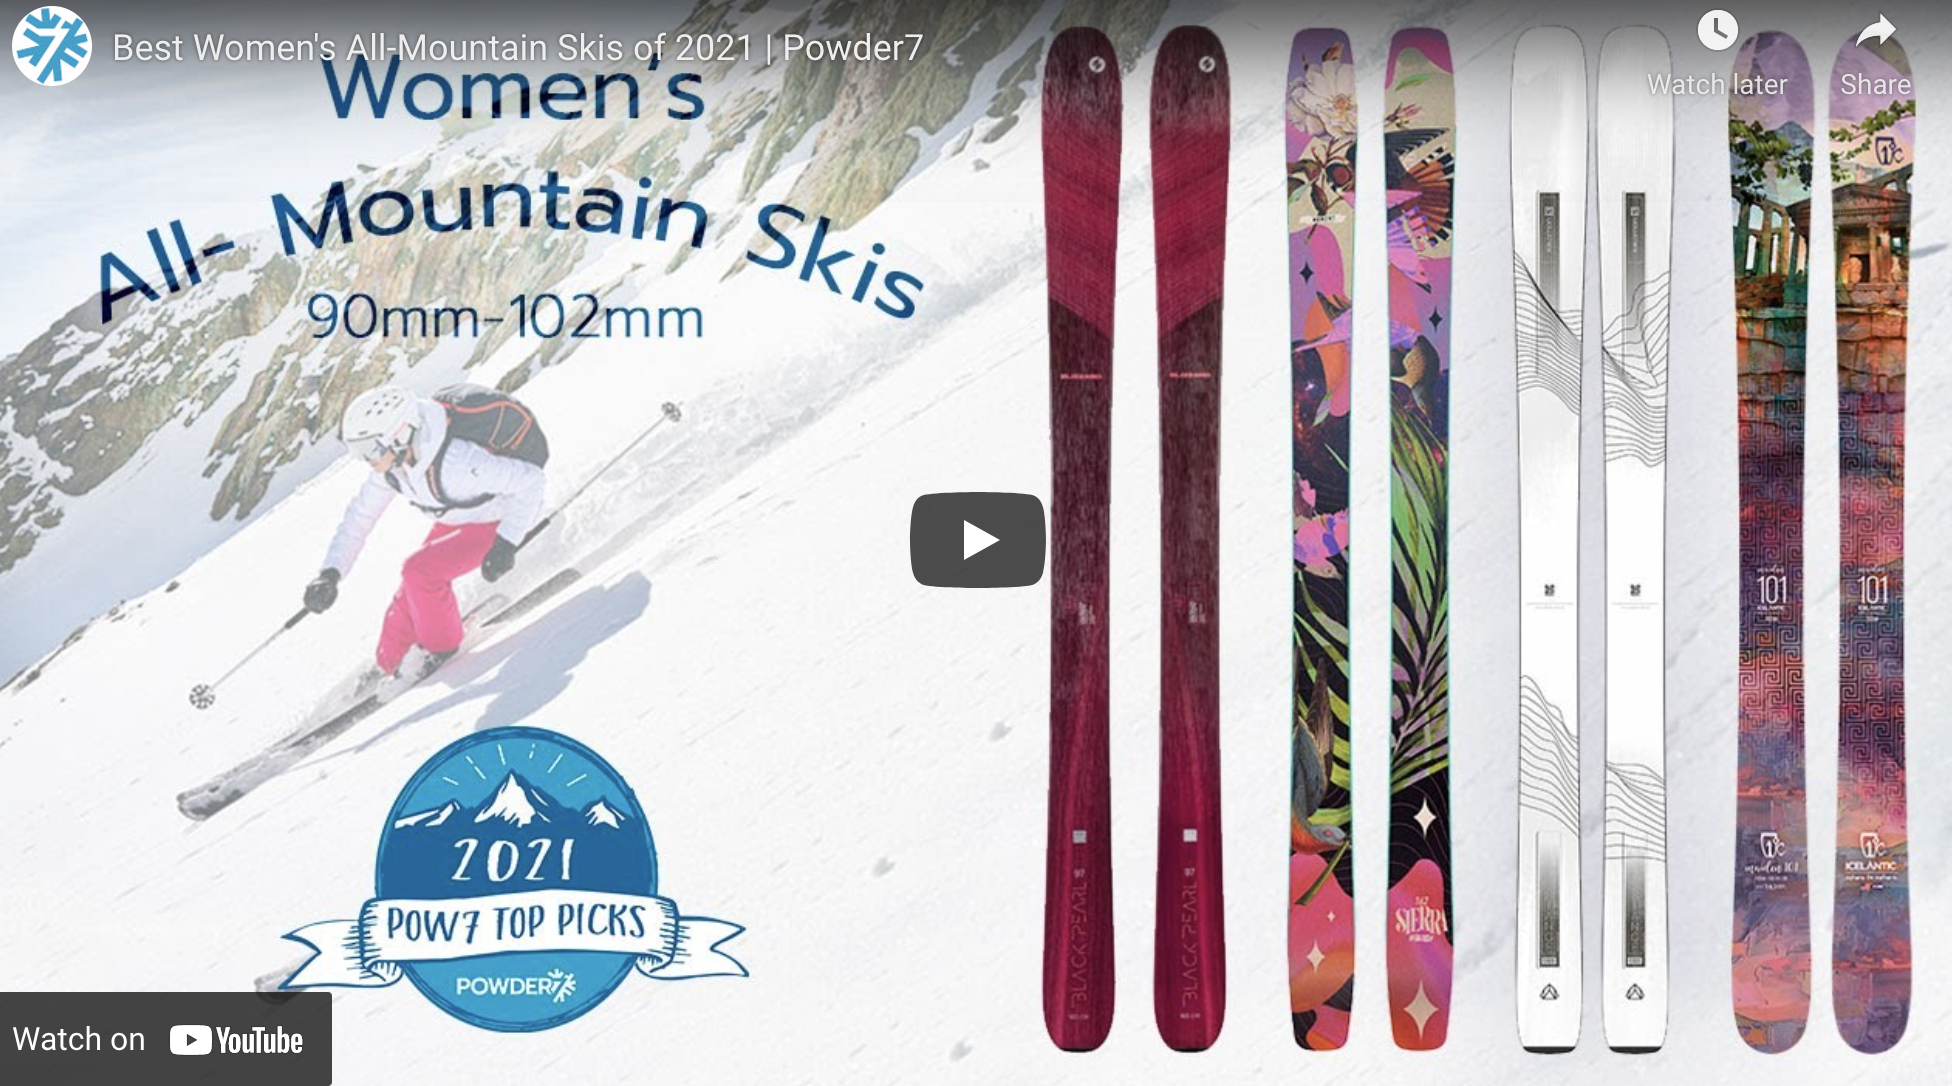 Video Reviews of 2021-22 Women’s Skis